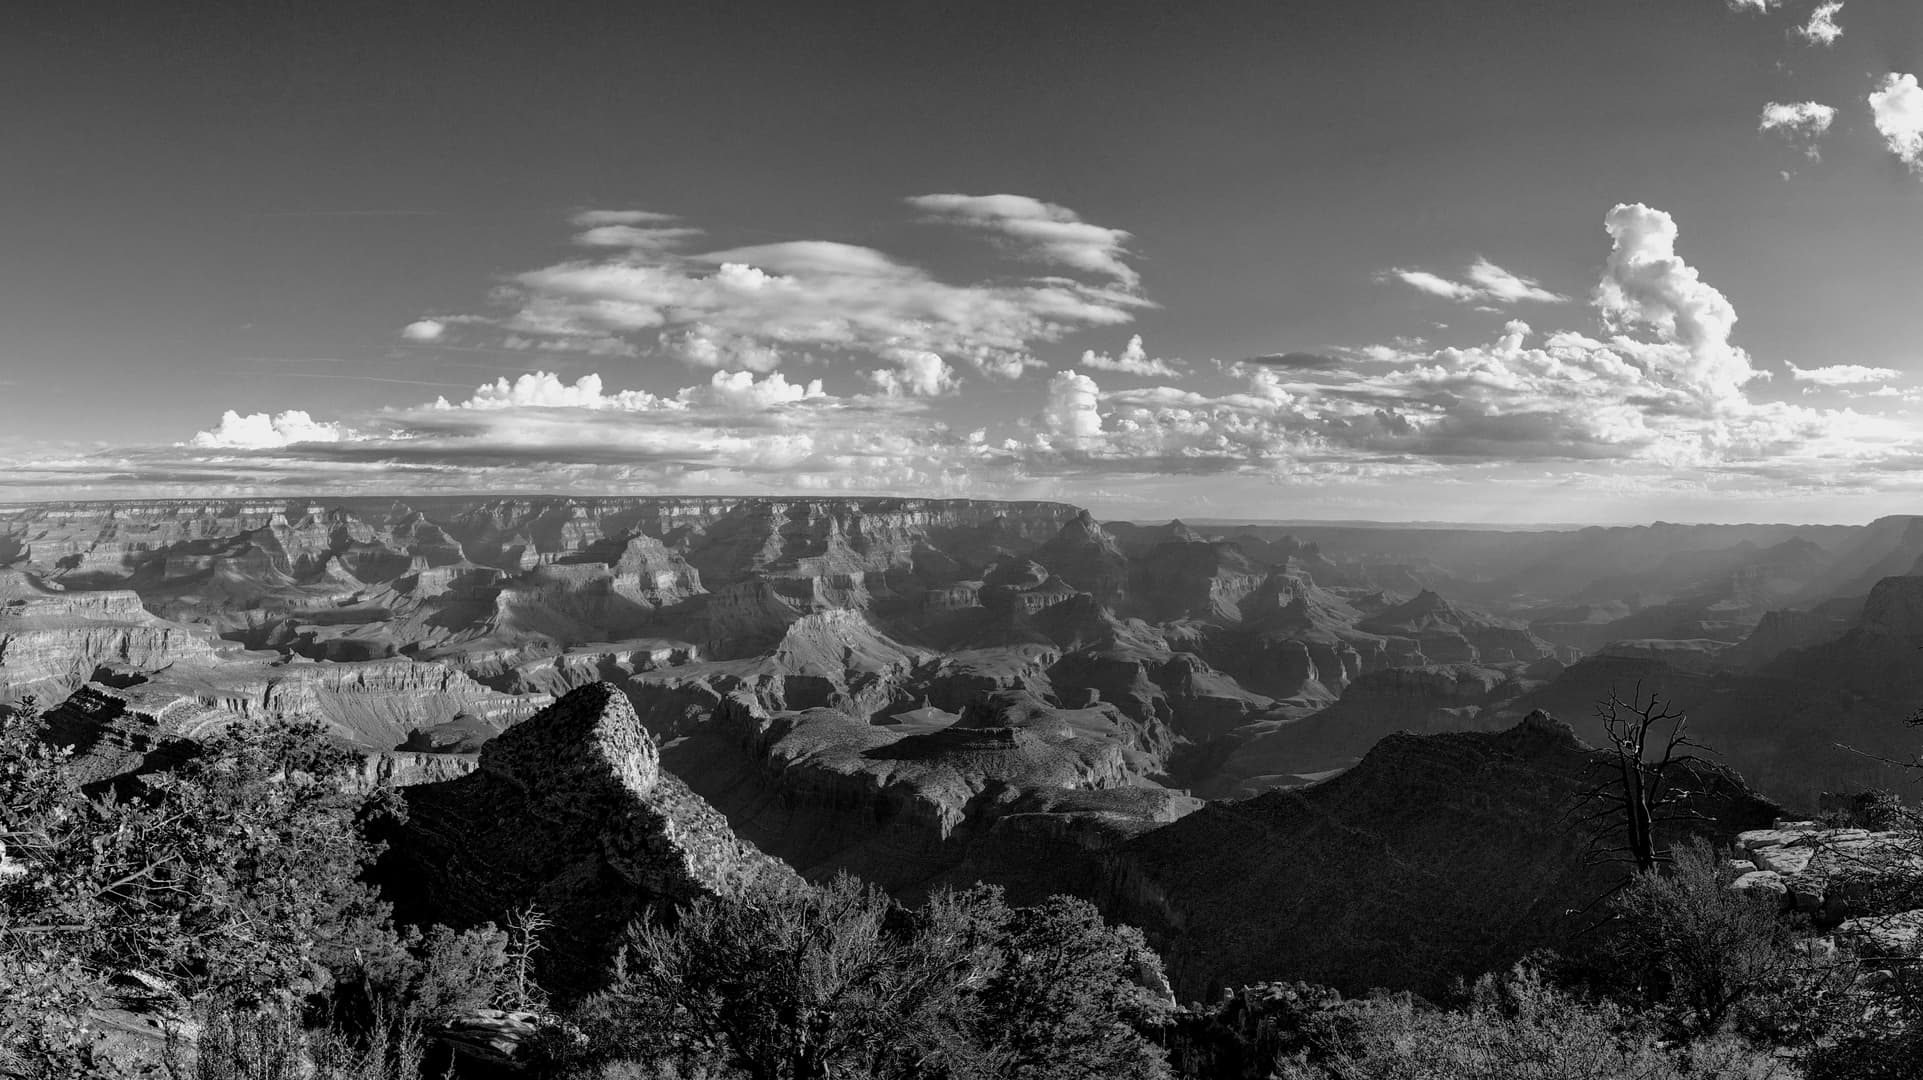 A black-and-white photograph of the Grand Canyon shortly after dawn.